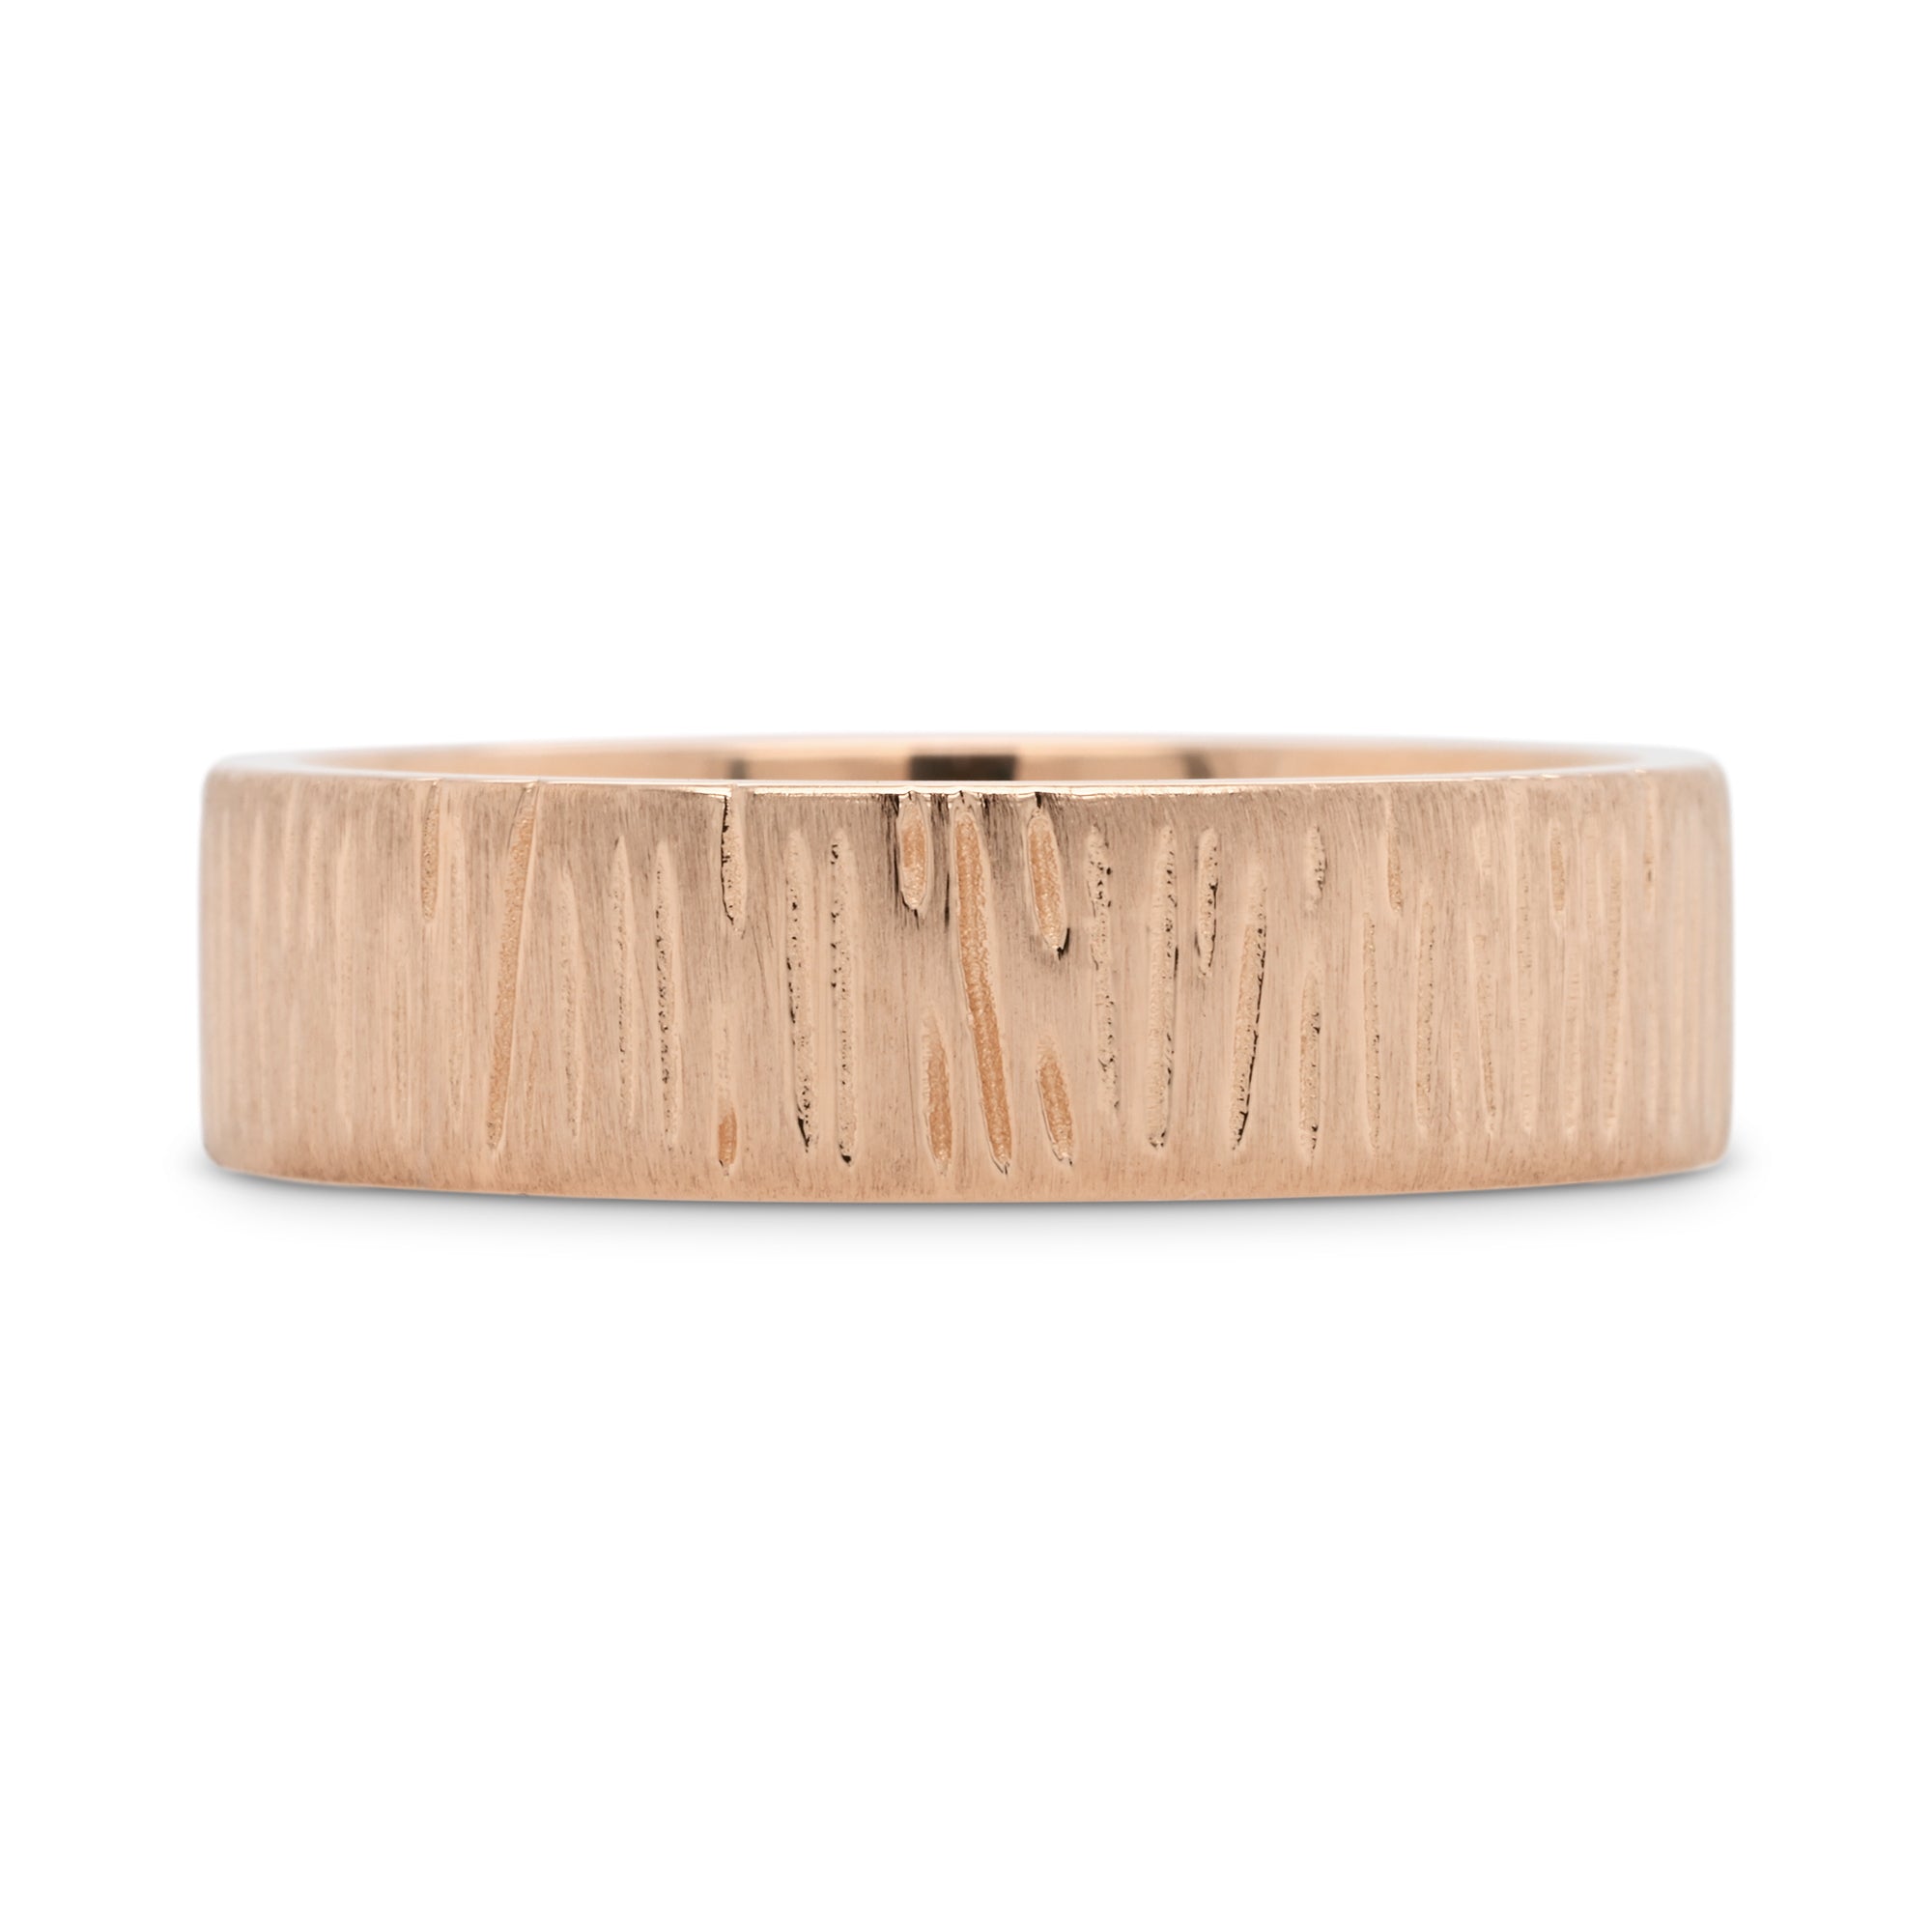 6mm rose gold wedding band with carved woodgrain texture